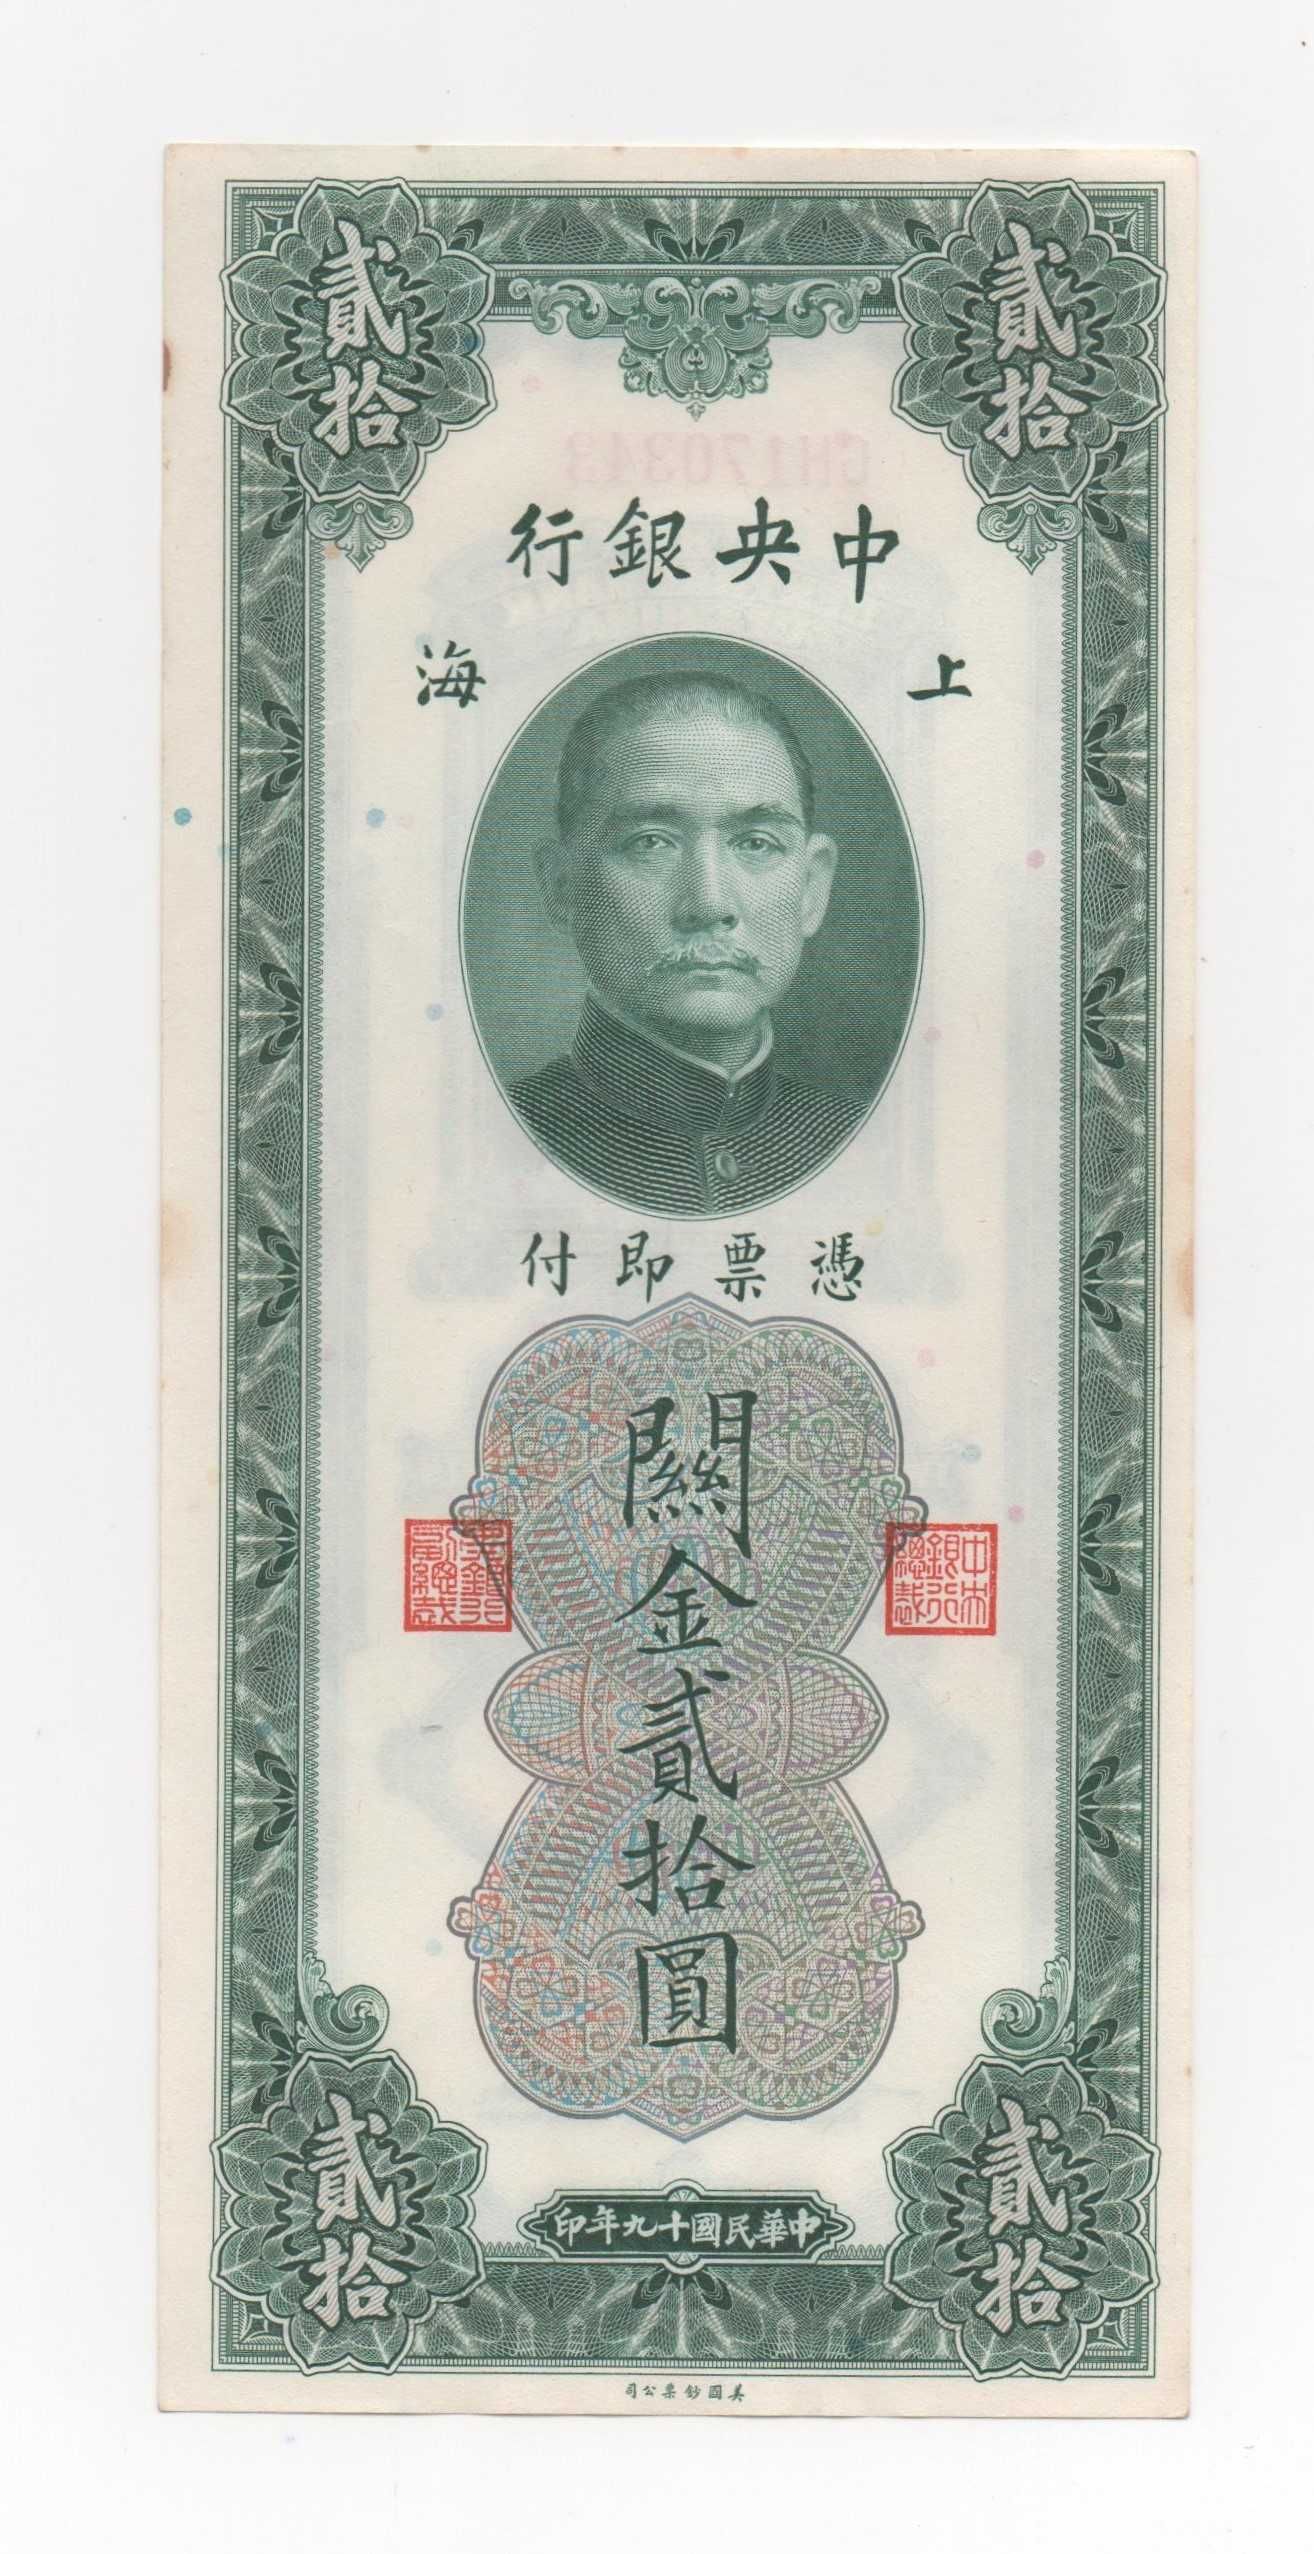 Chiny, banknot 20 customs gold units 1930 - st.-1/1